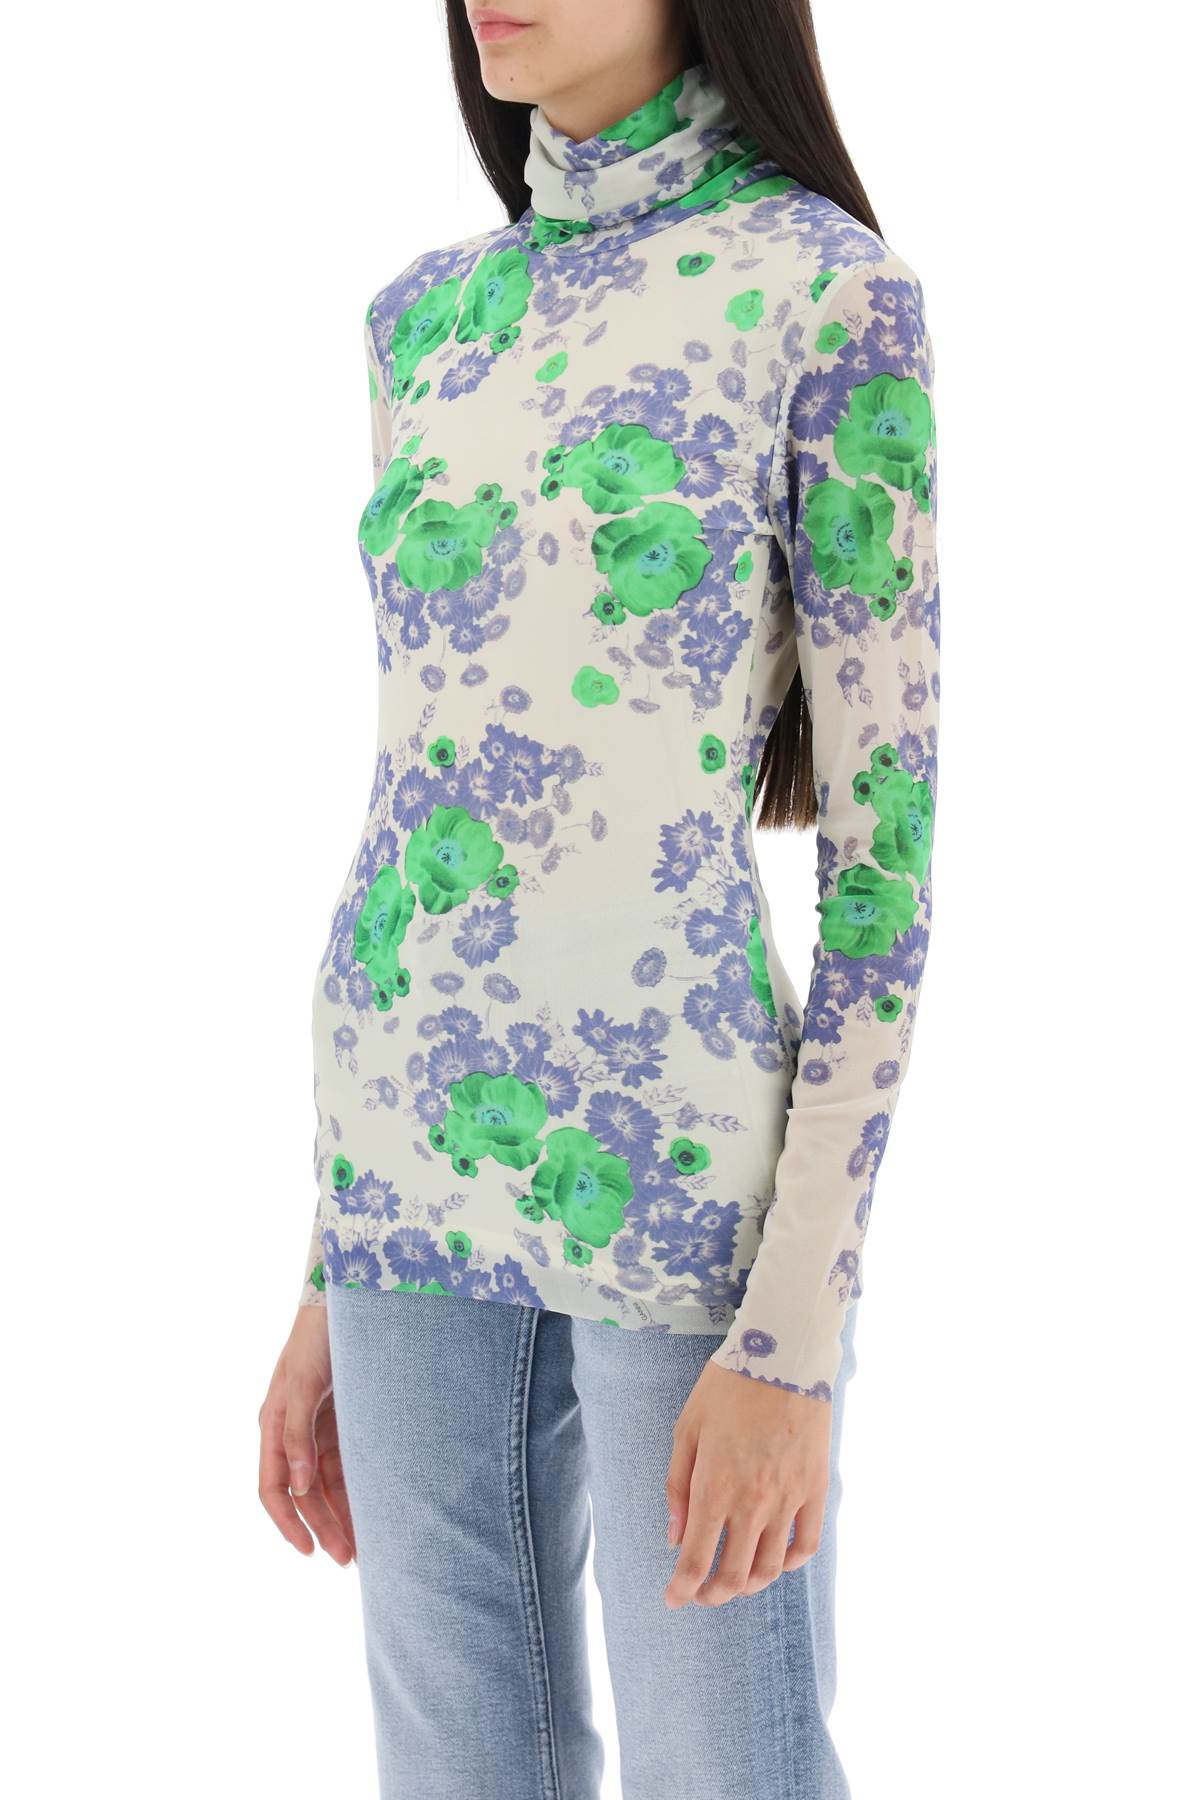 Ganni long-sleeved top in mesh with floral pattern-3